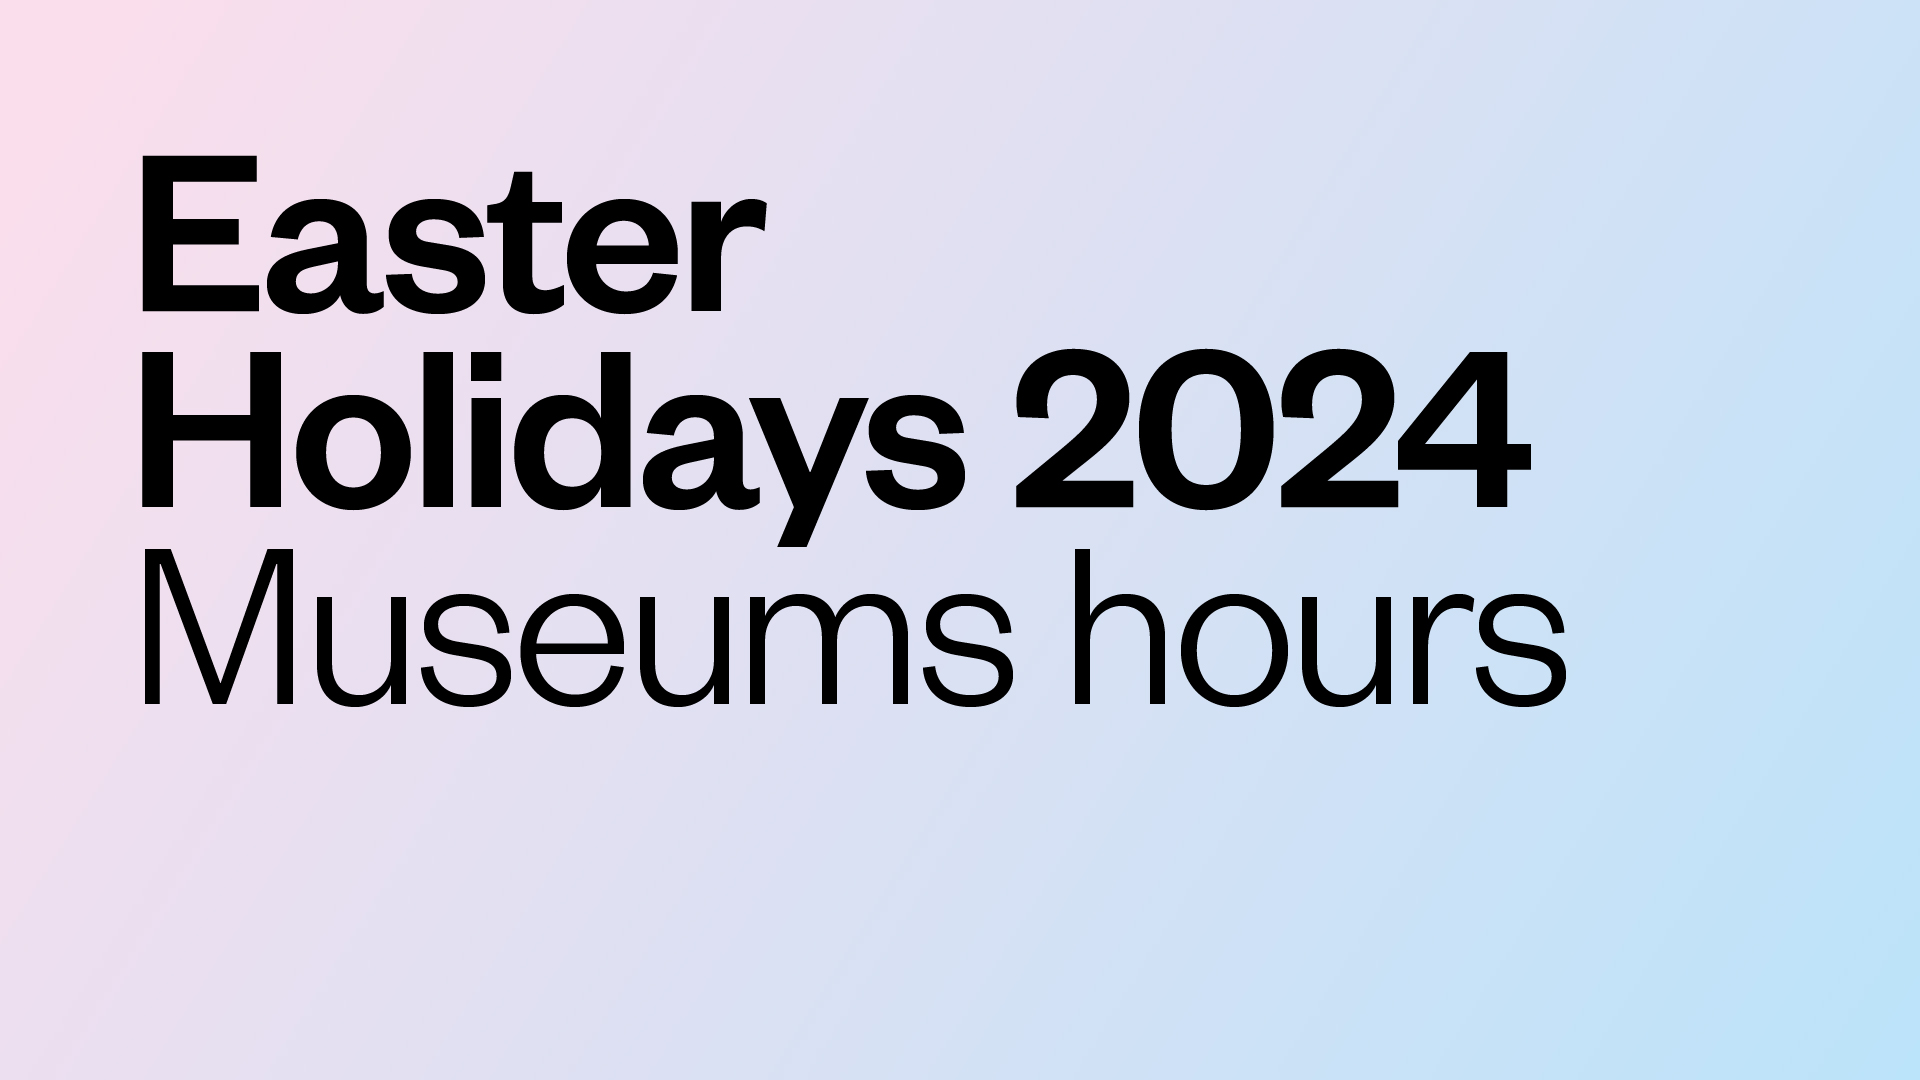 Easter Holidays 2024 - Museums hours